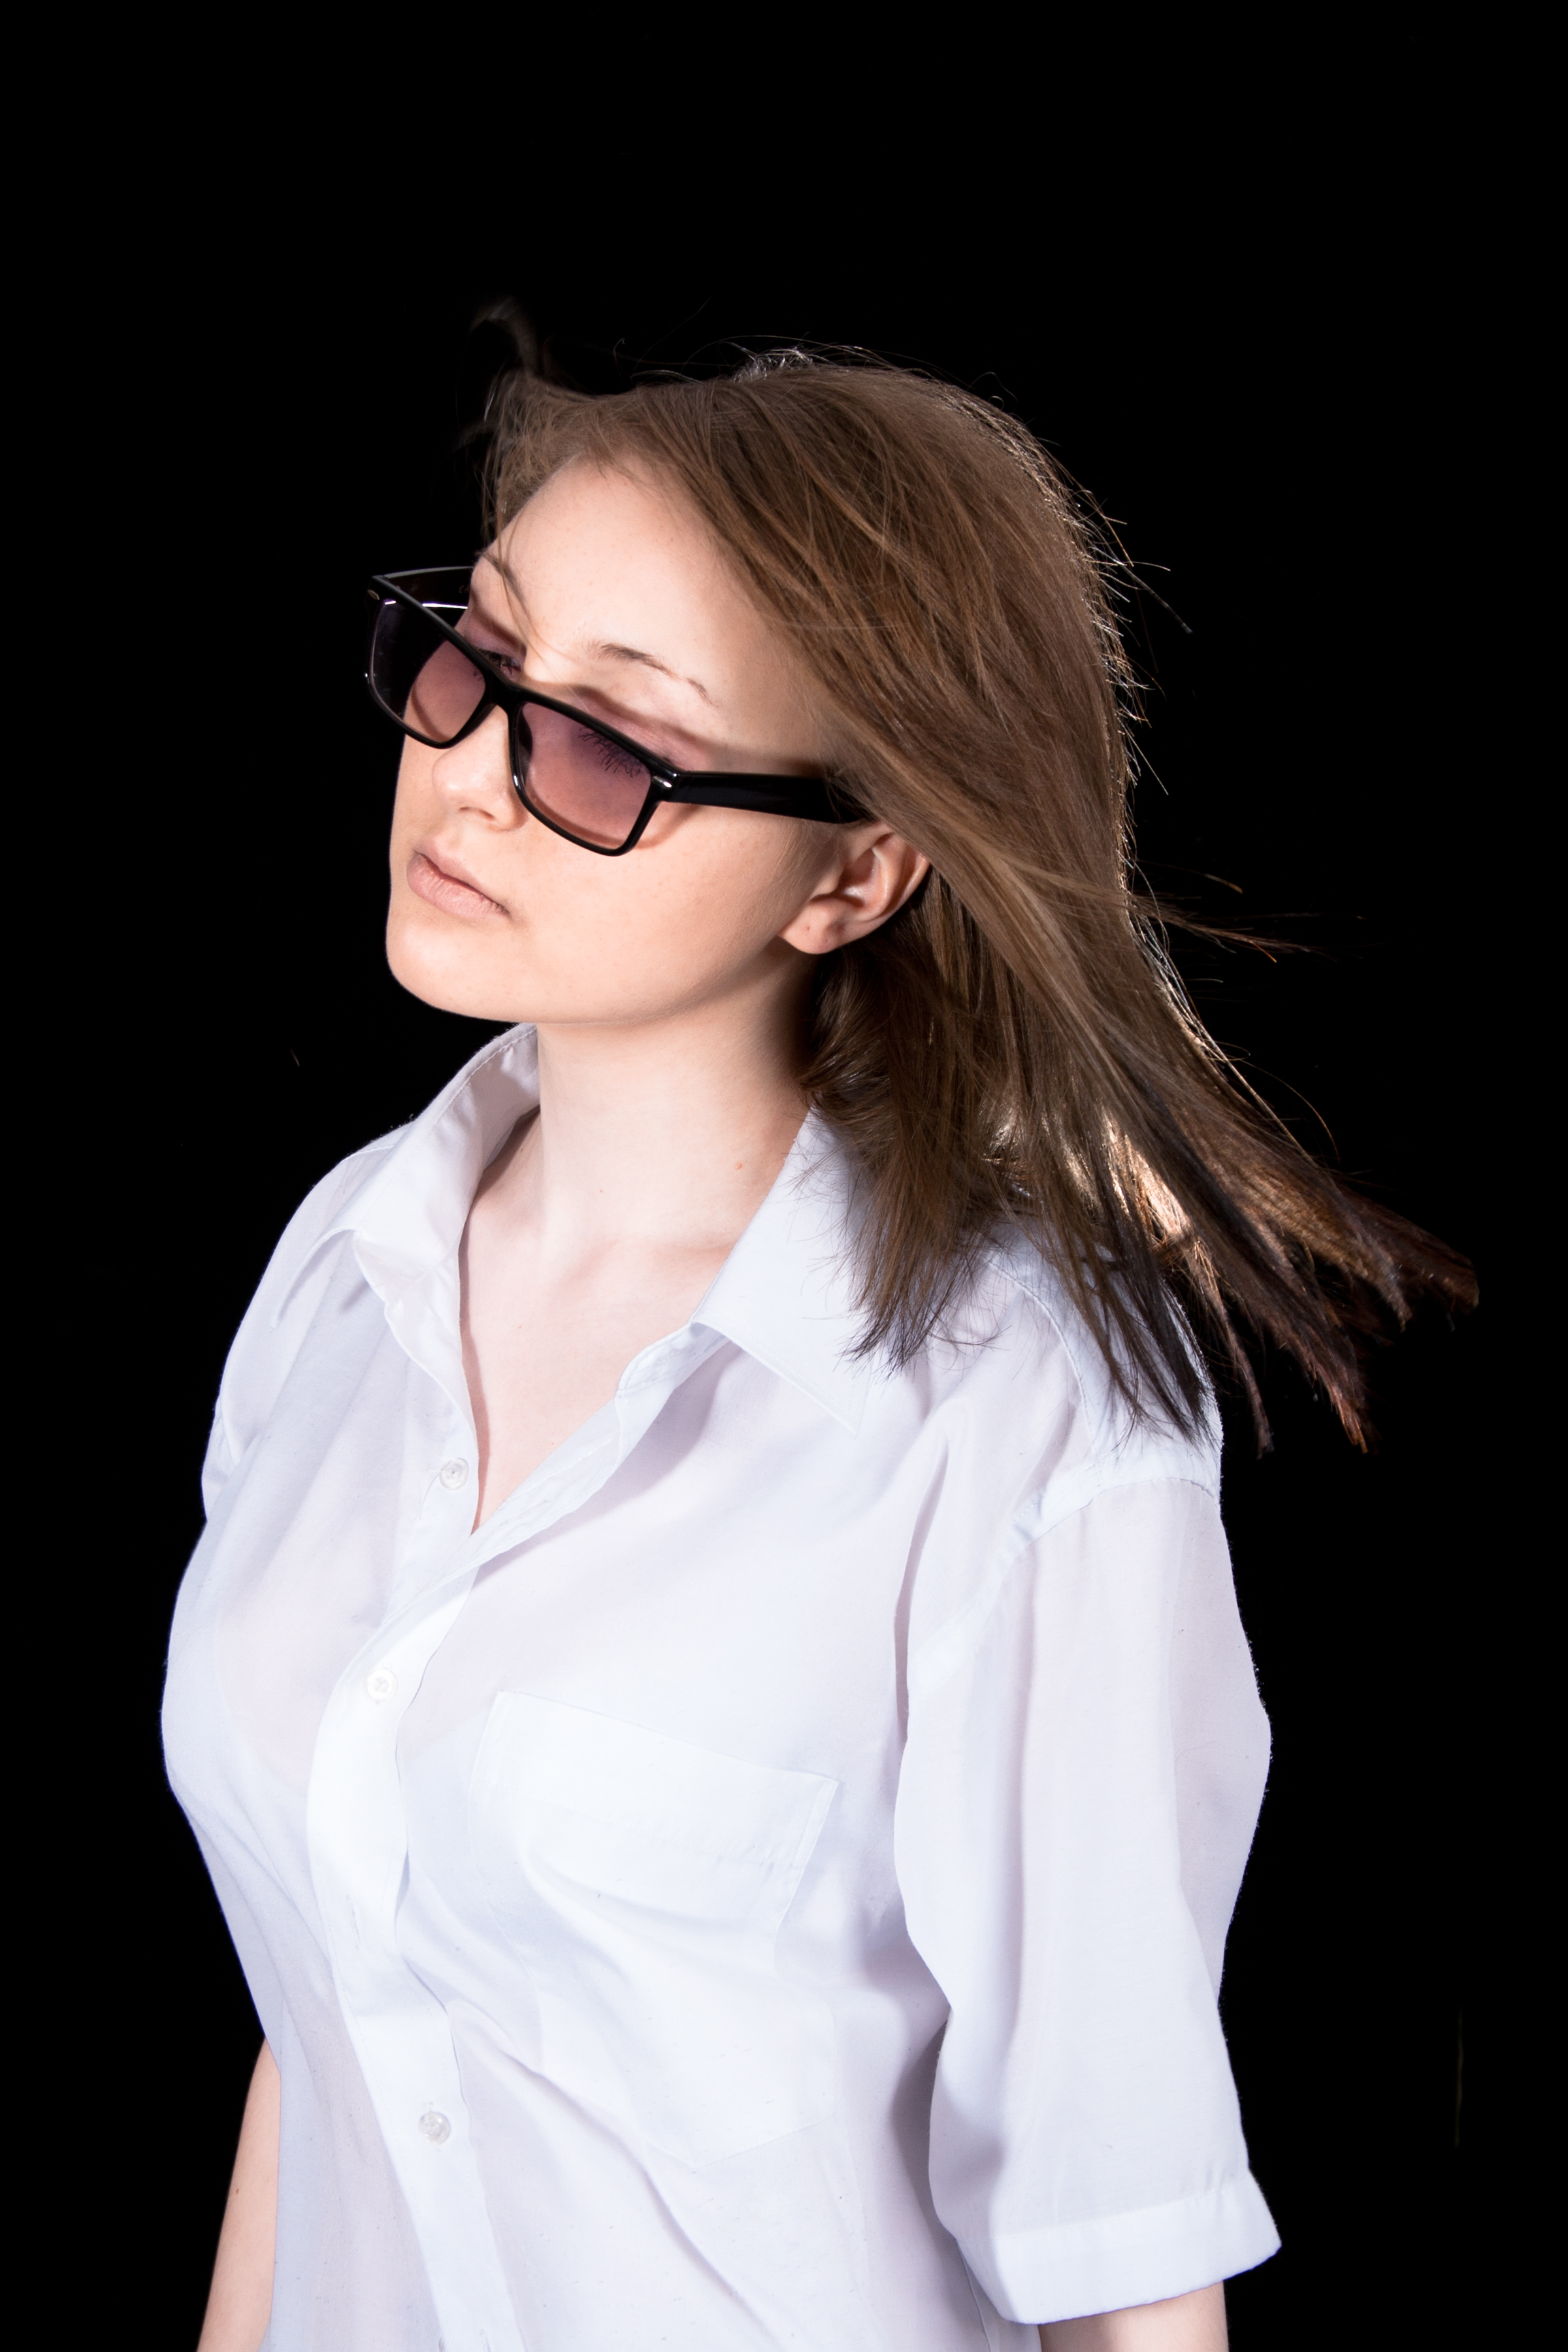 Young woman with glasses photo